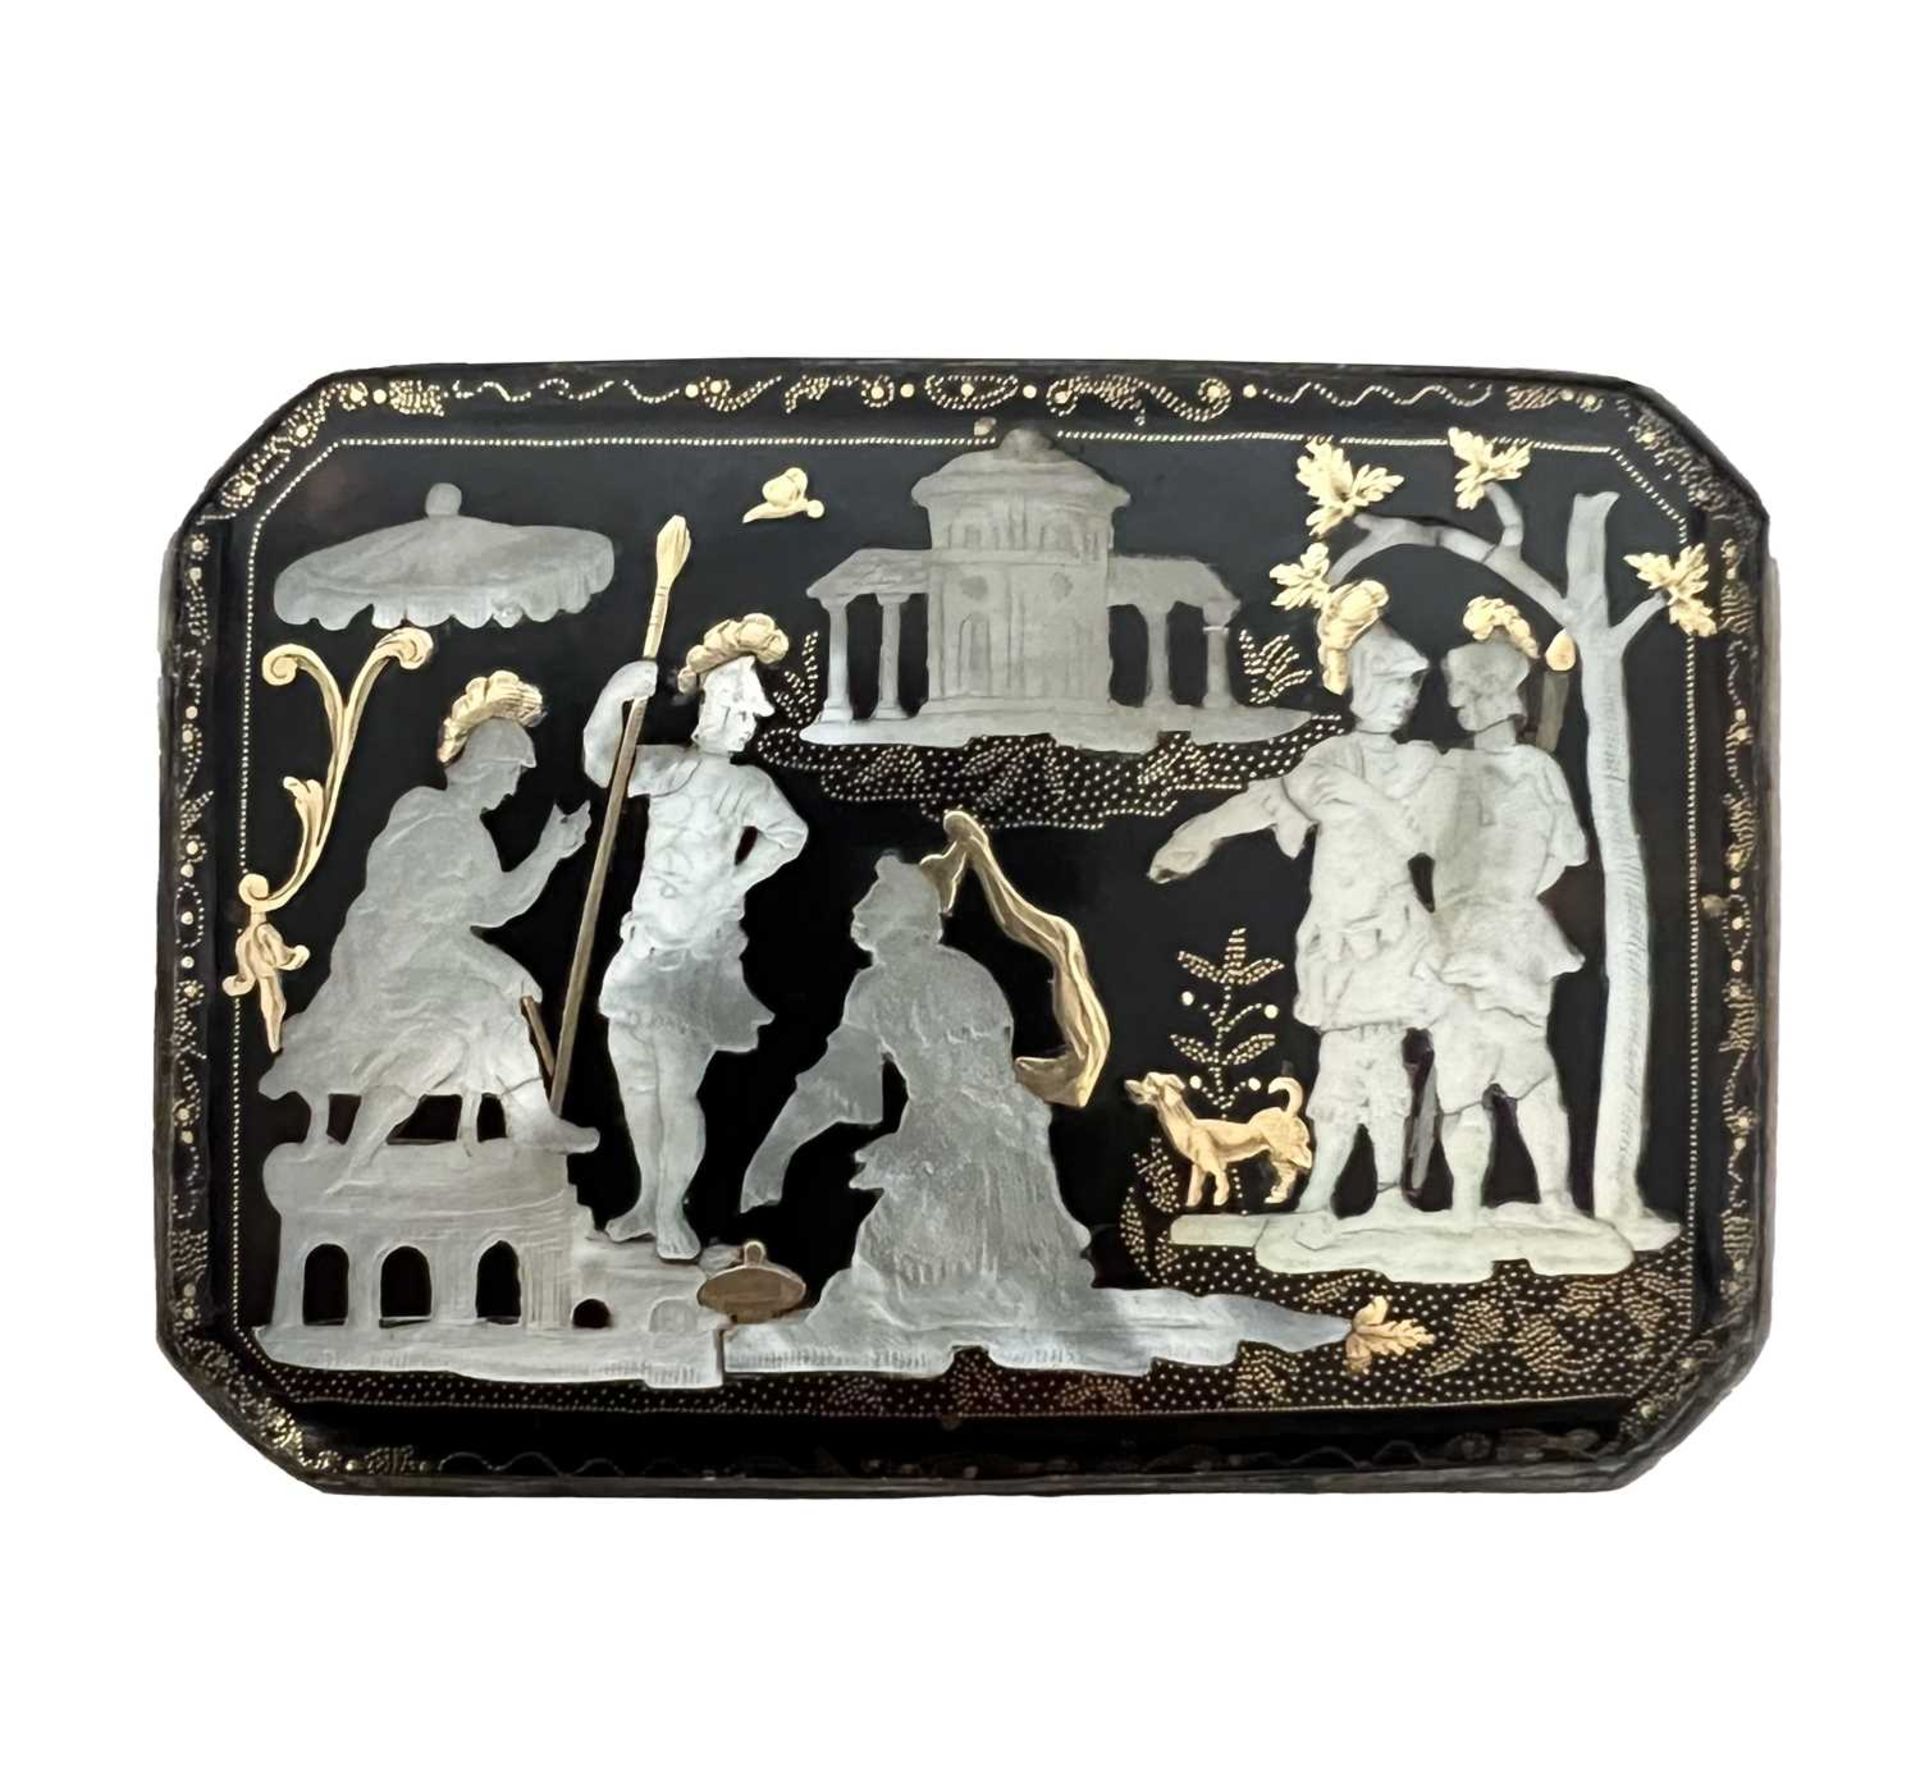 A RARE AND FINE 18TH CENTURY NEAPOLITAN GOLD PIQUE AND MOTHER OF PEARL INLAID BOX